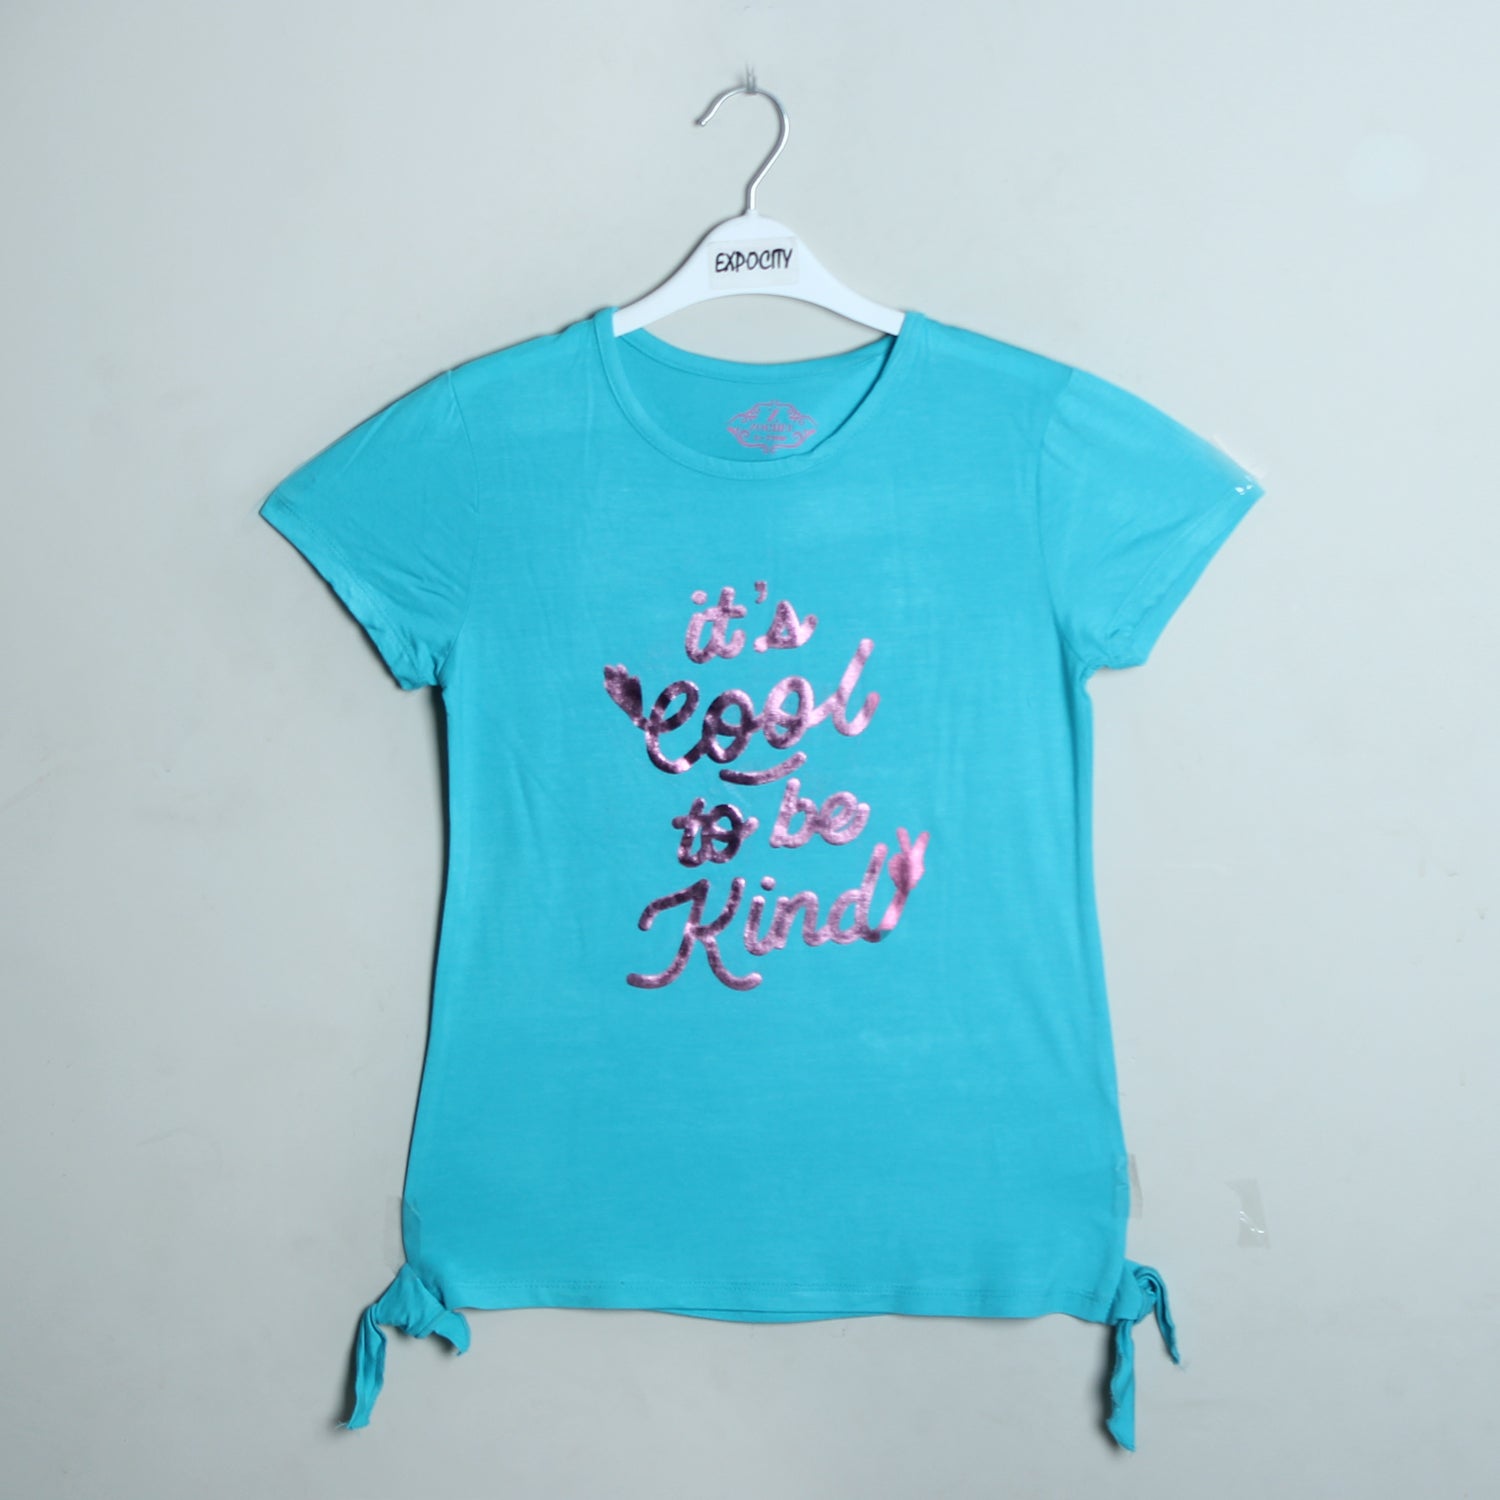 SEA GREEN IT'S COOL TO BE KIND PRINTED T-SHIRT - Expo City